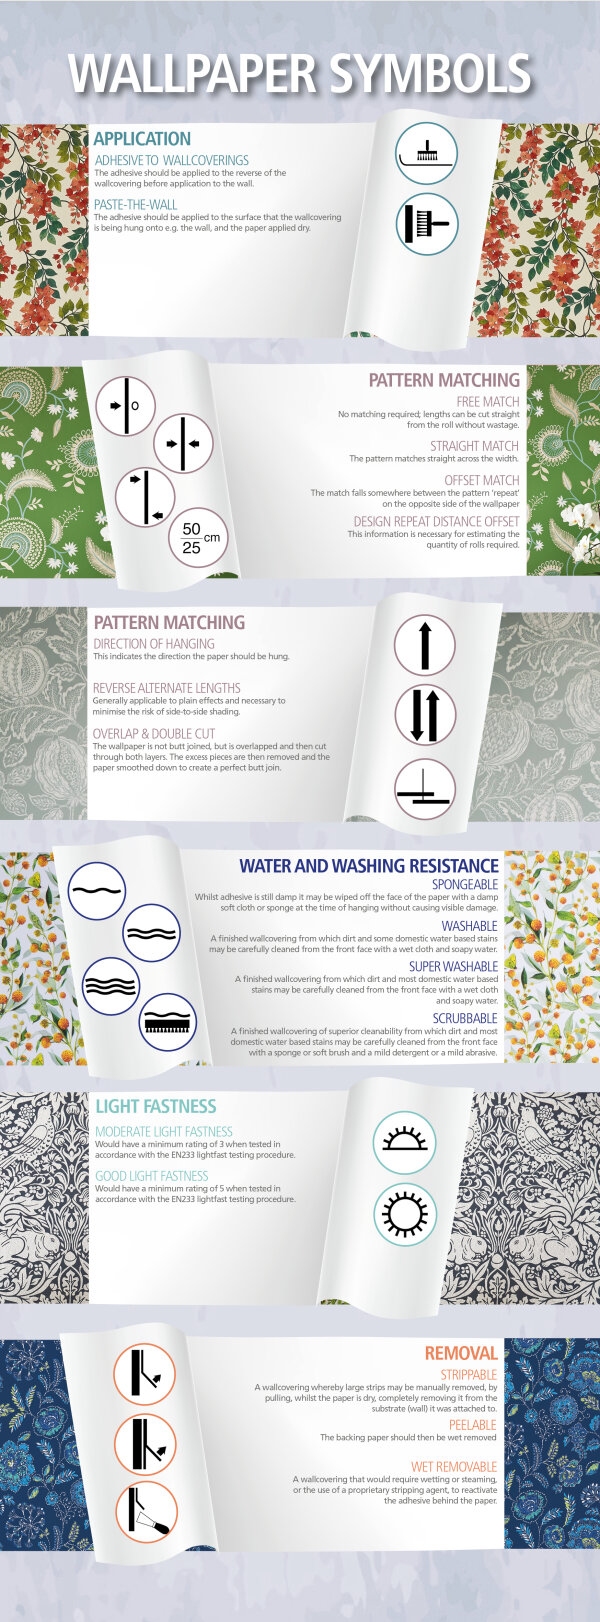 Wallpaper symbols...the meanings behind the marks!